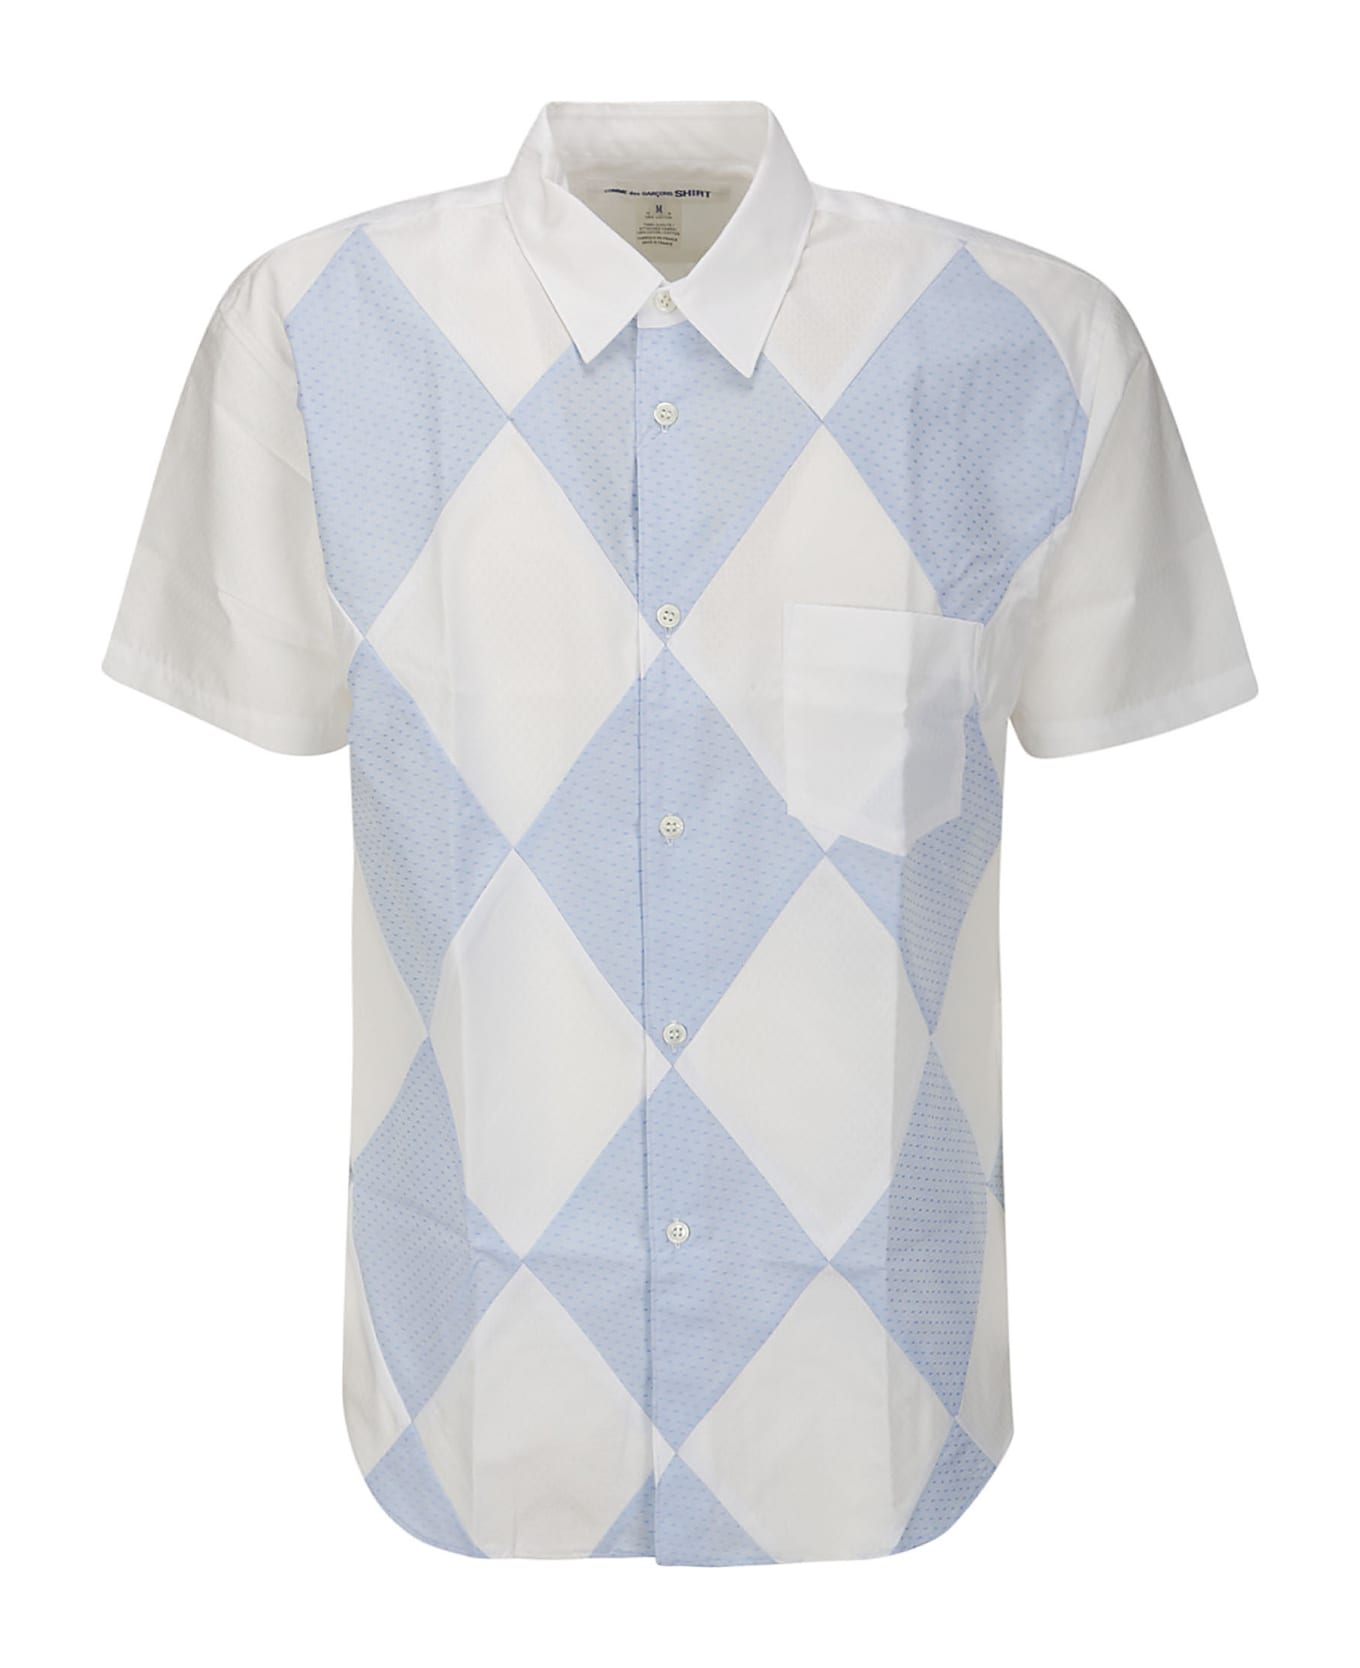 Comme des Garçons Shirt Cotton Dobby With Dot Pattern X Cotton Dobby With - WHITE/BLUE